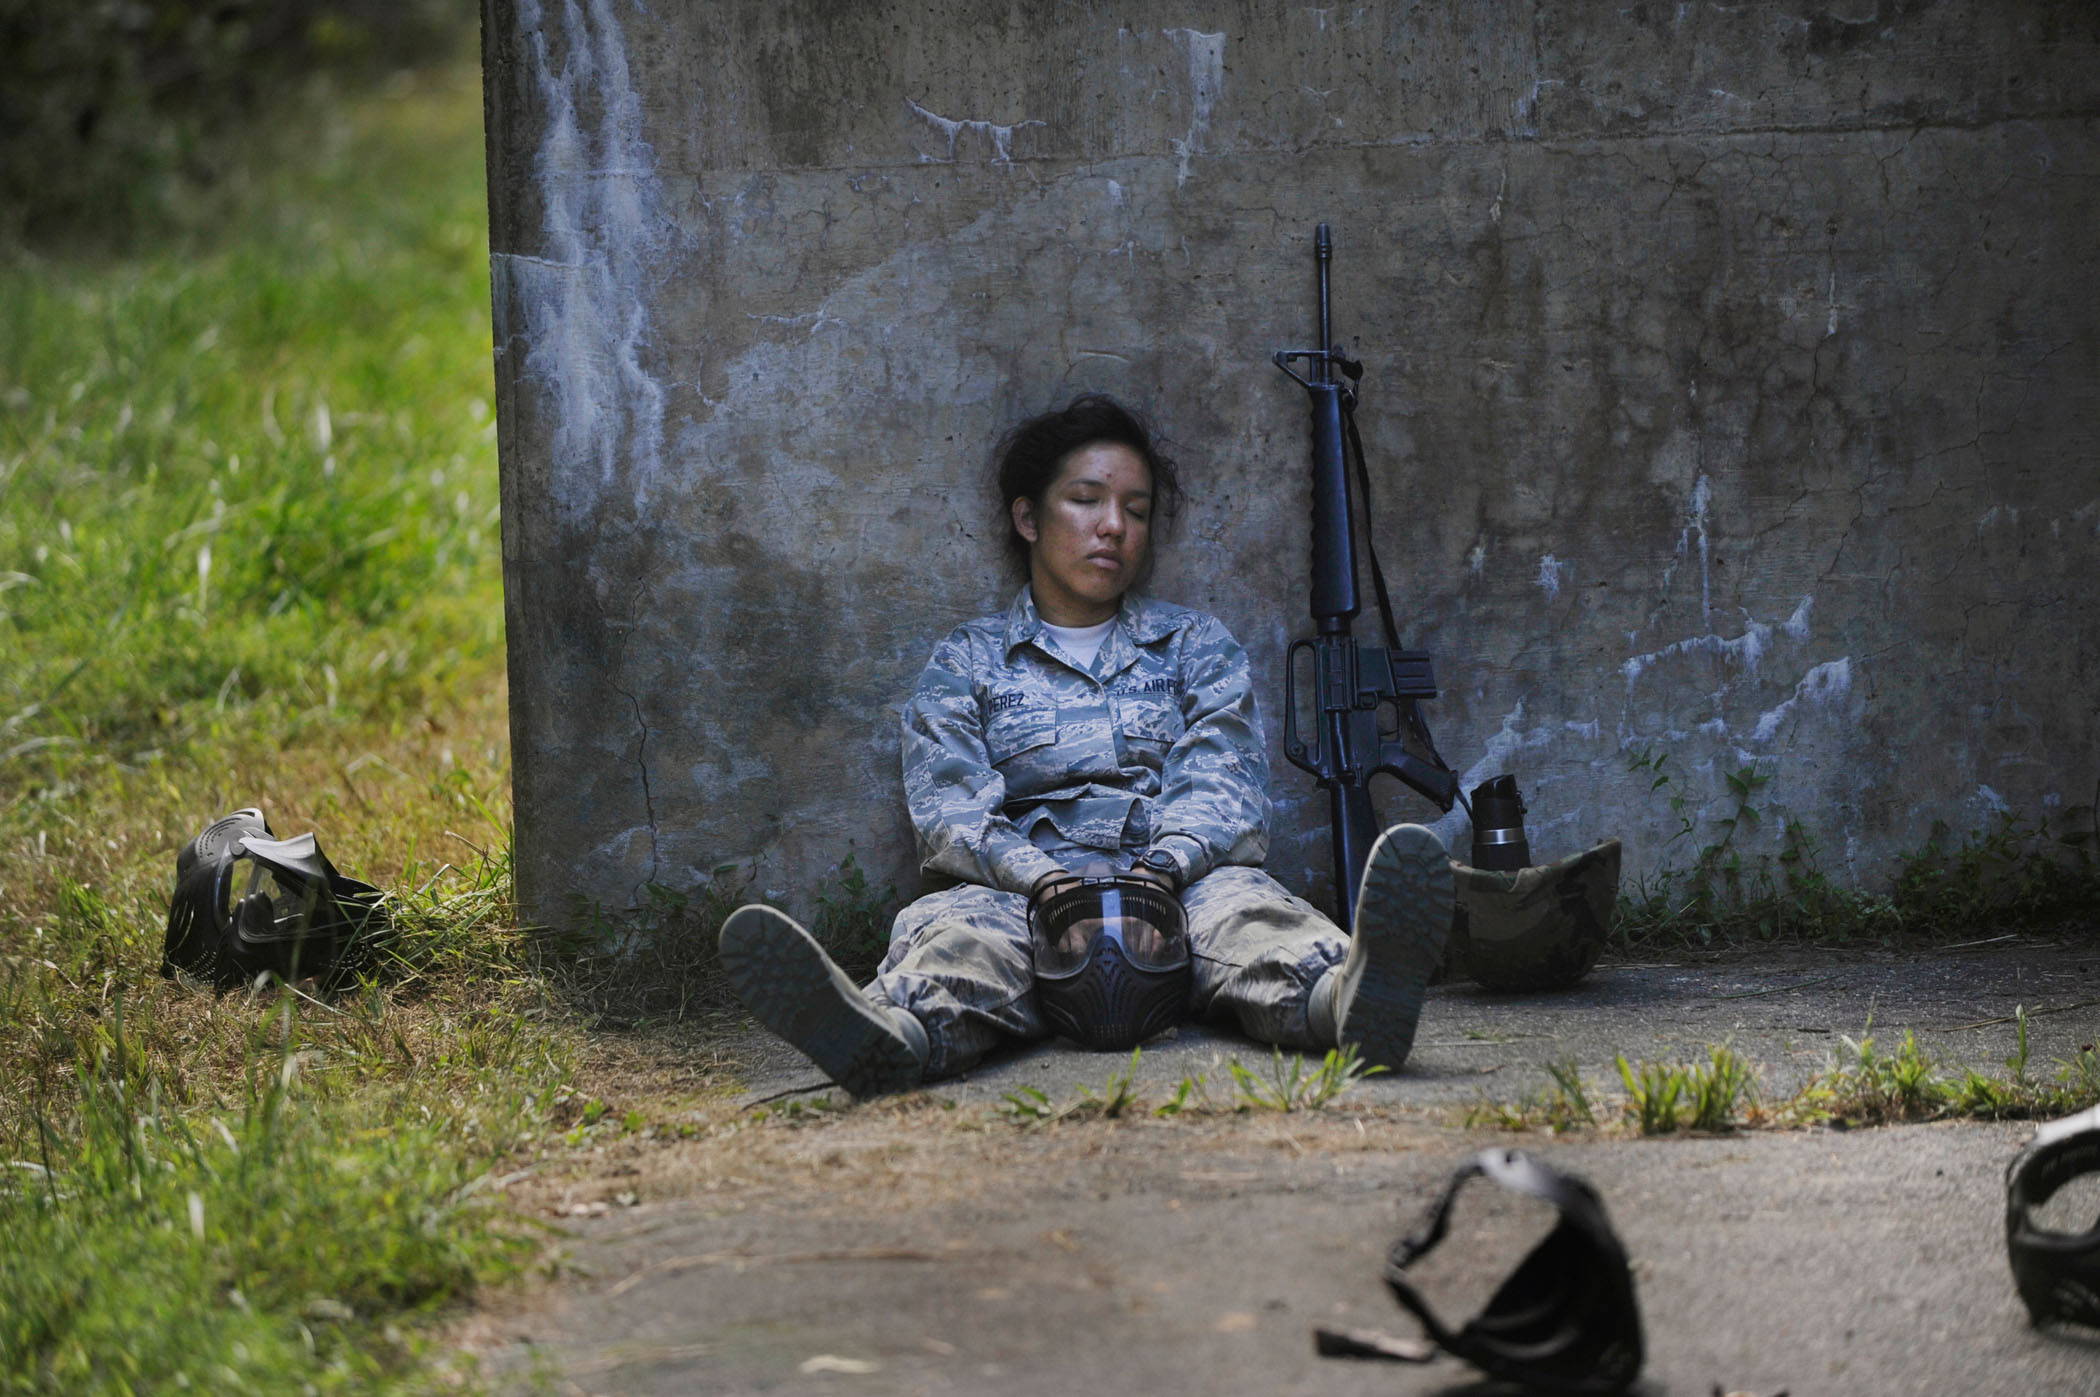 Airman Basic Rebecca Perez takes a break from patrol during a field training exercise